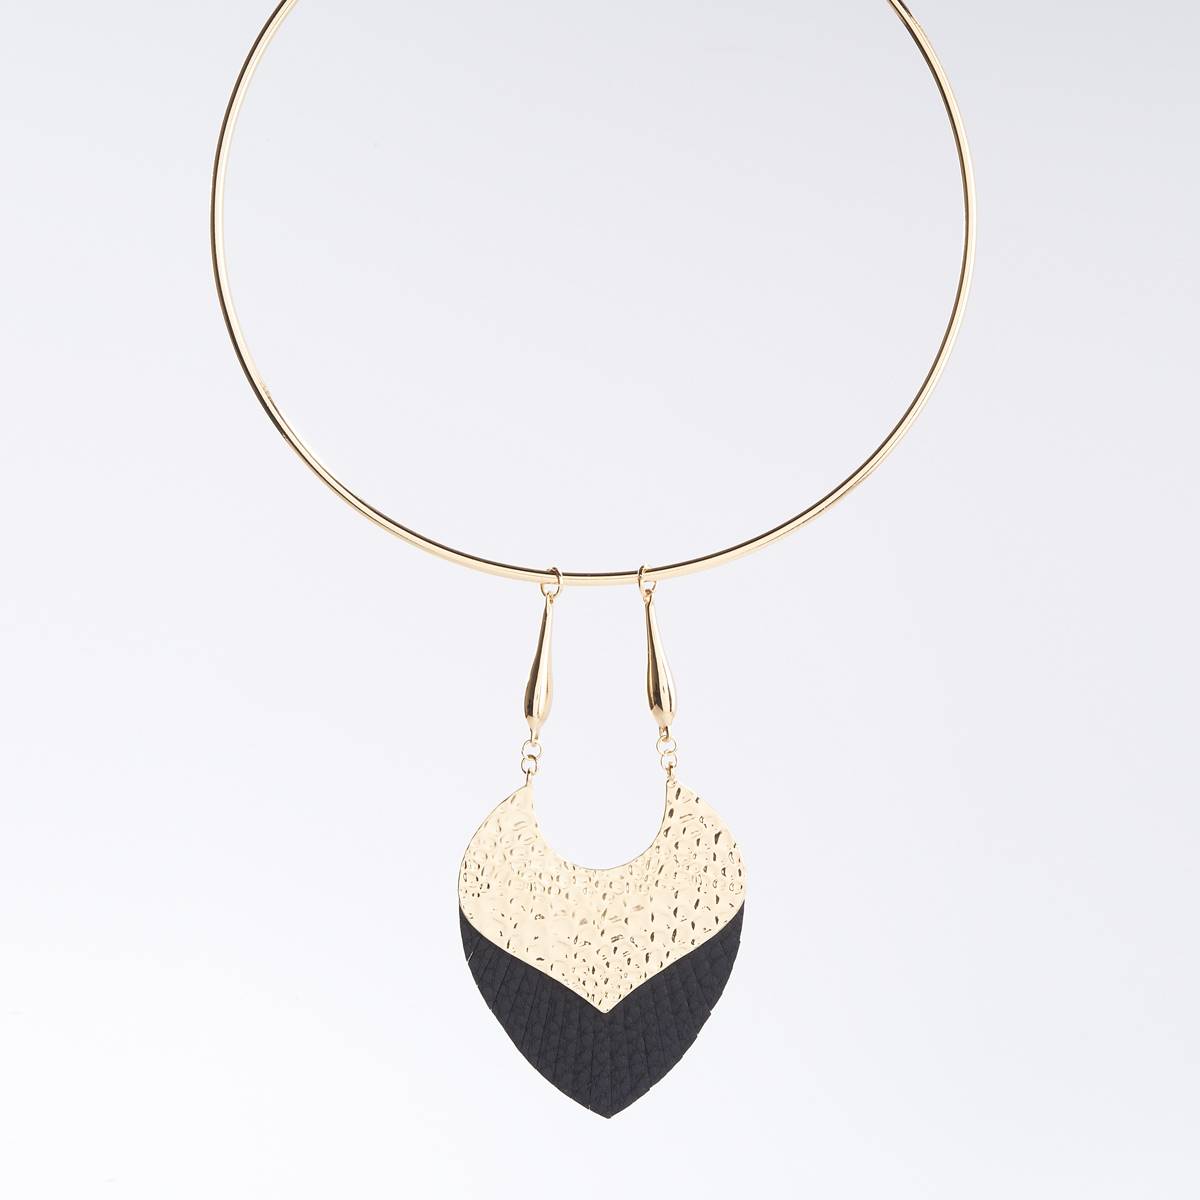 Ashley Cooper(tm) Hammered Textured Pendant Collar Necklace